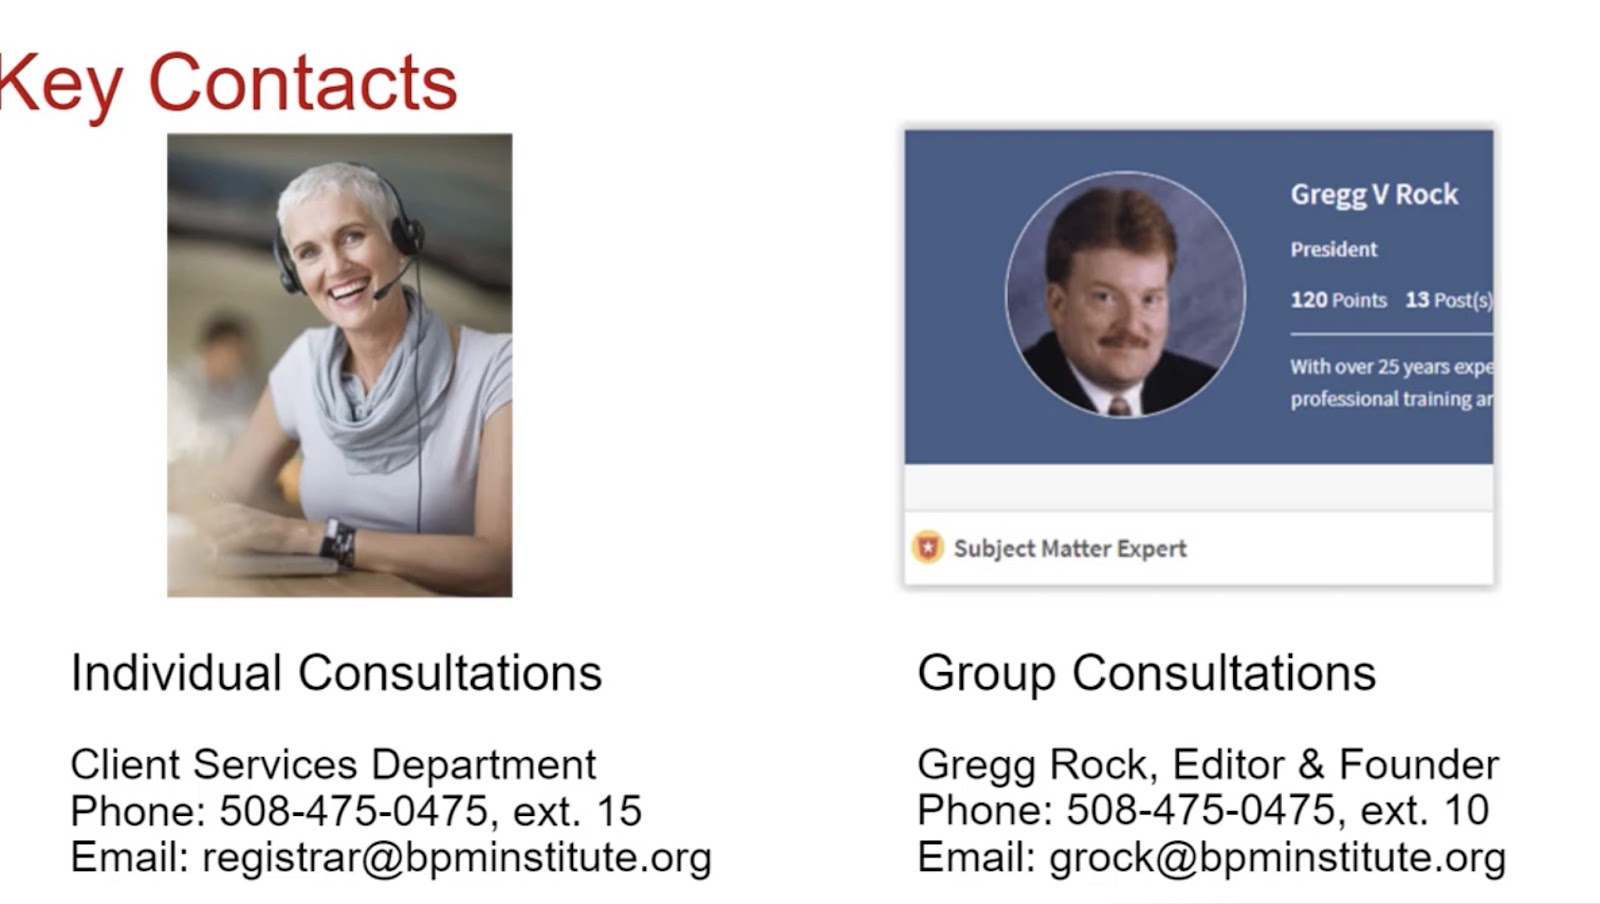 Key Contacts example